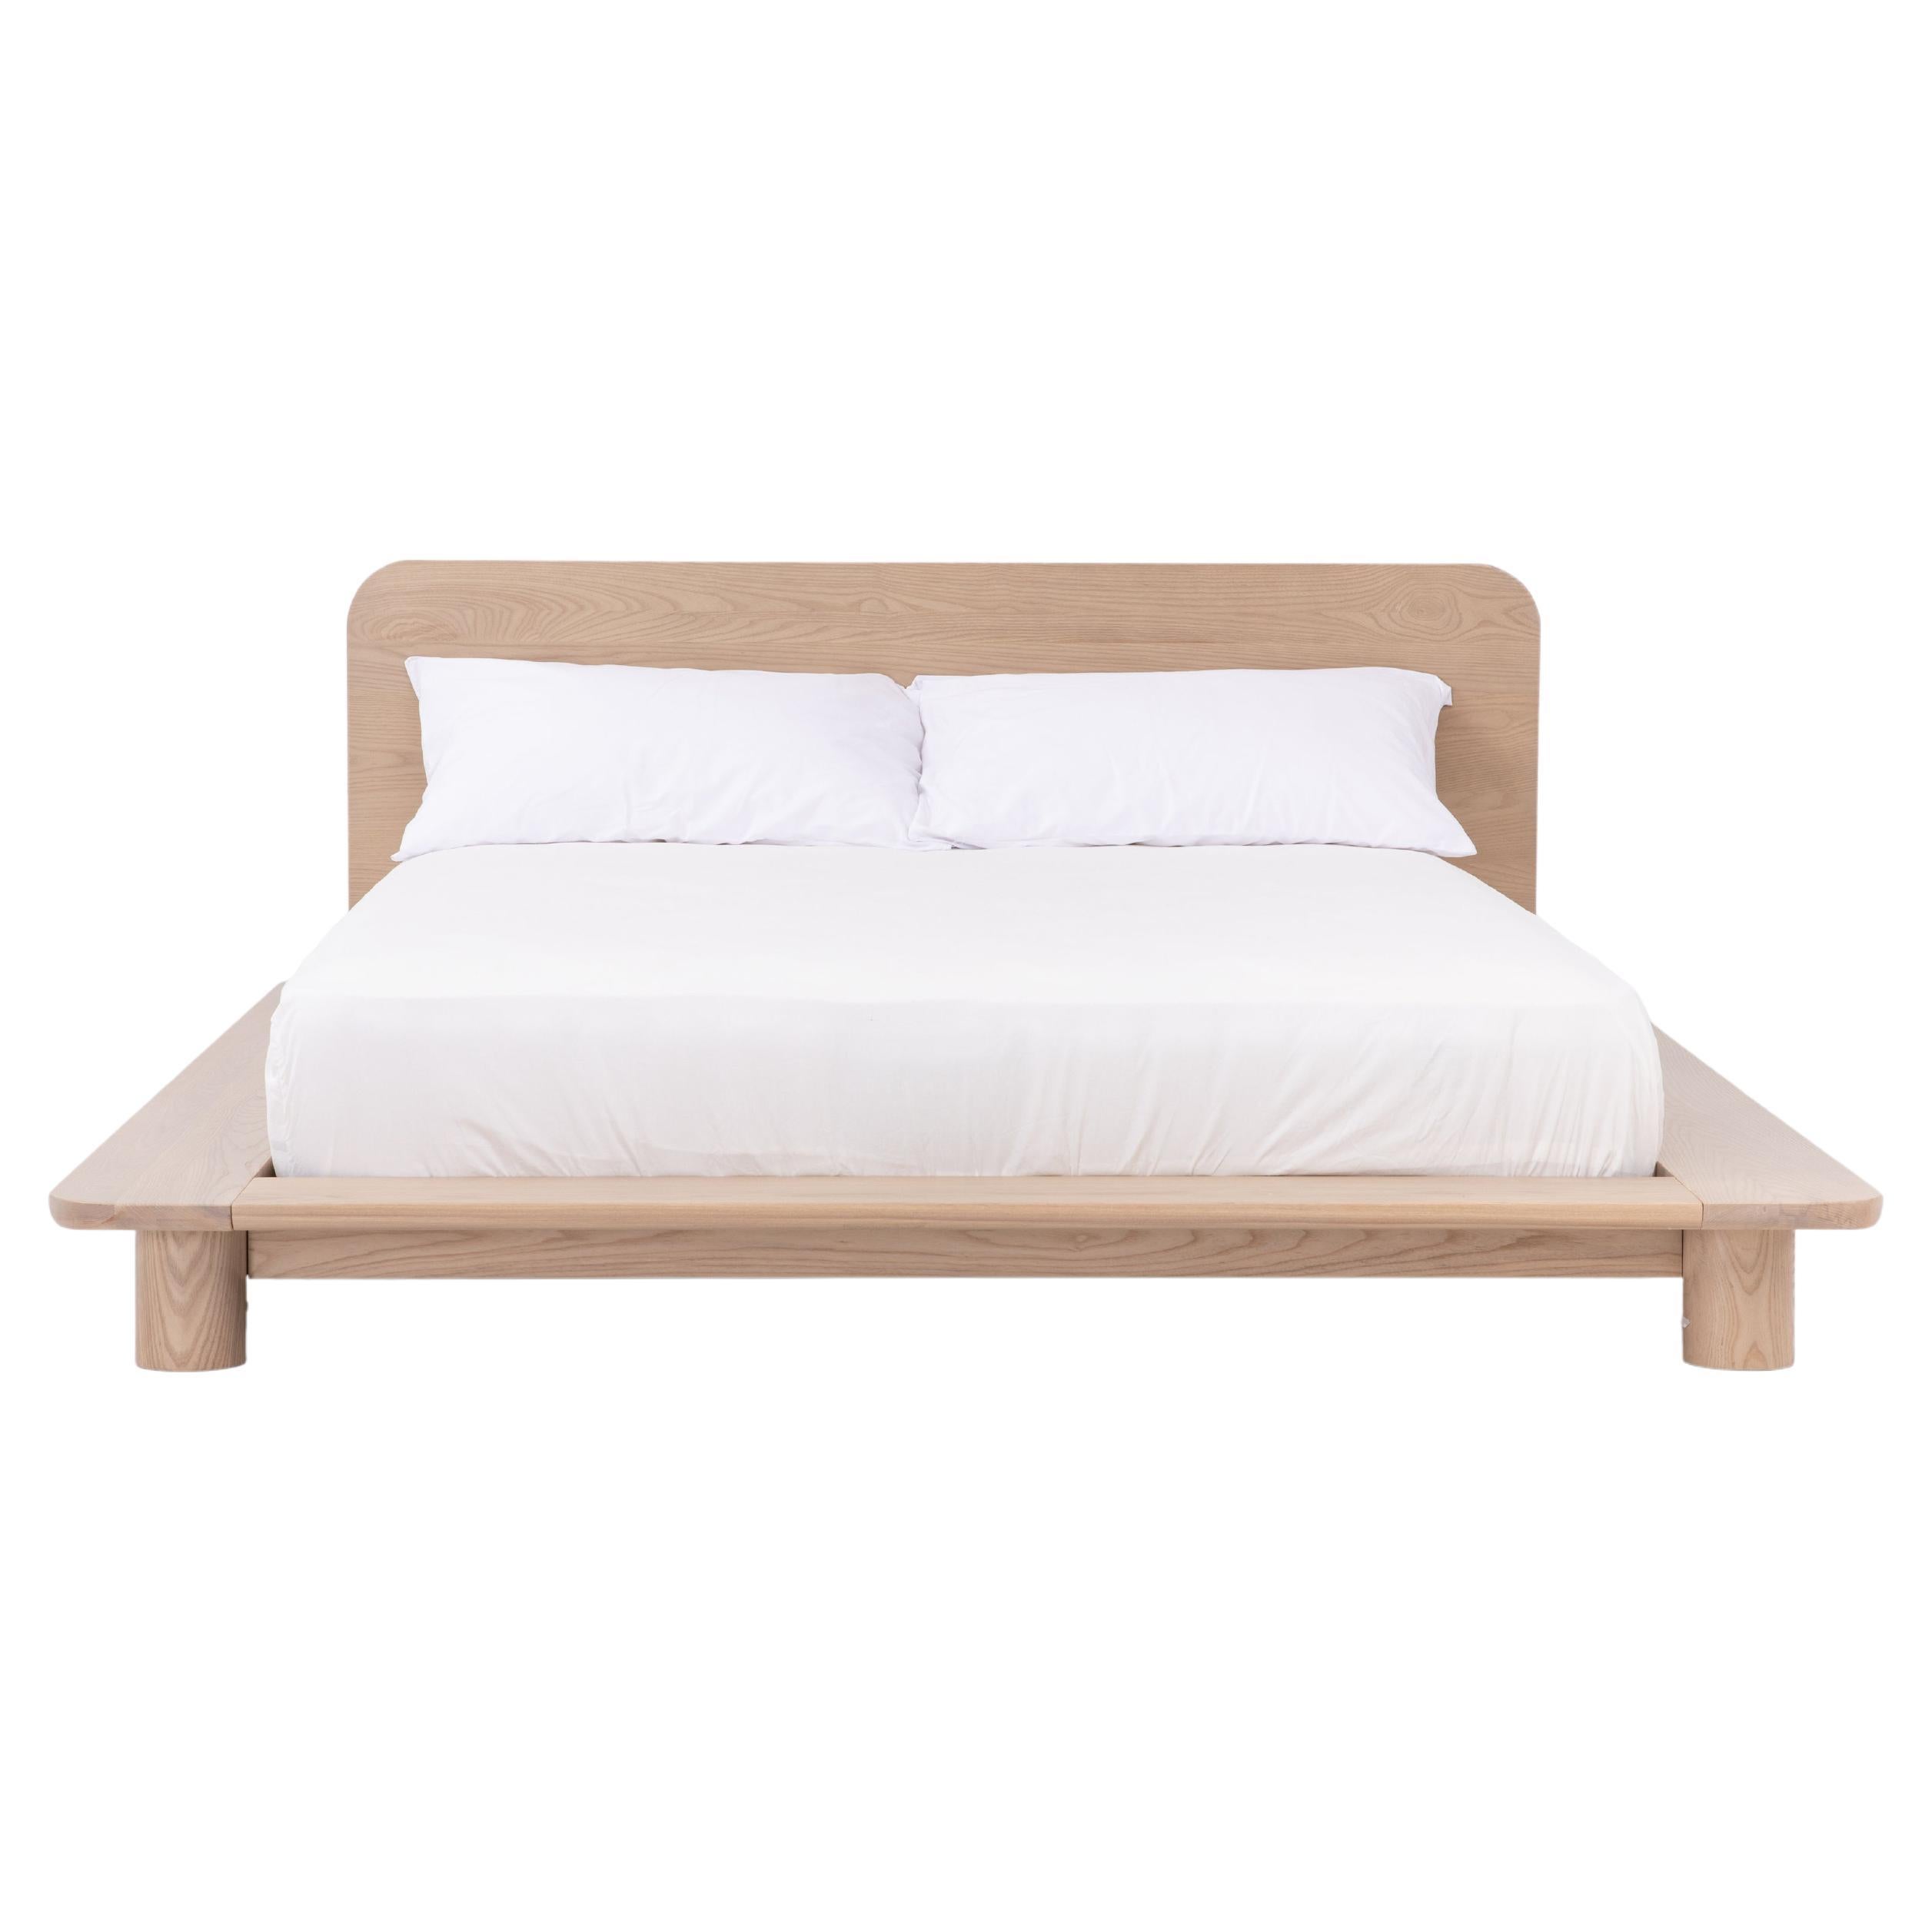 Kiral Bed by Sun at Six, Minimalist Nude King Bed in Wood